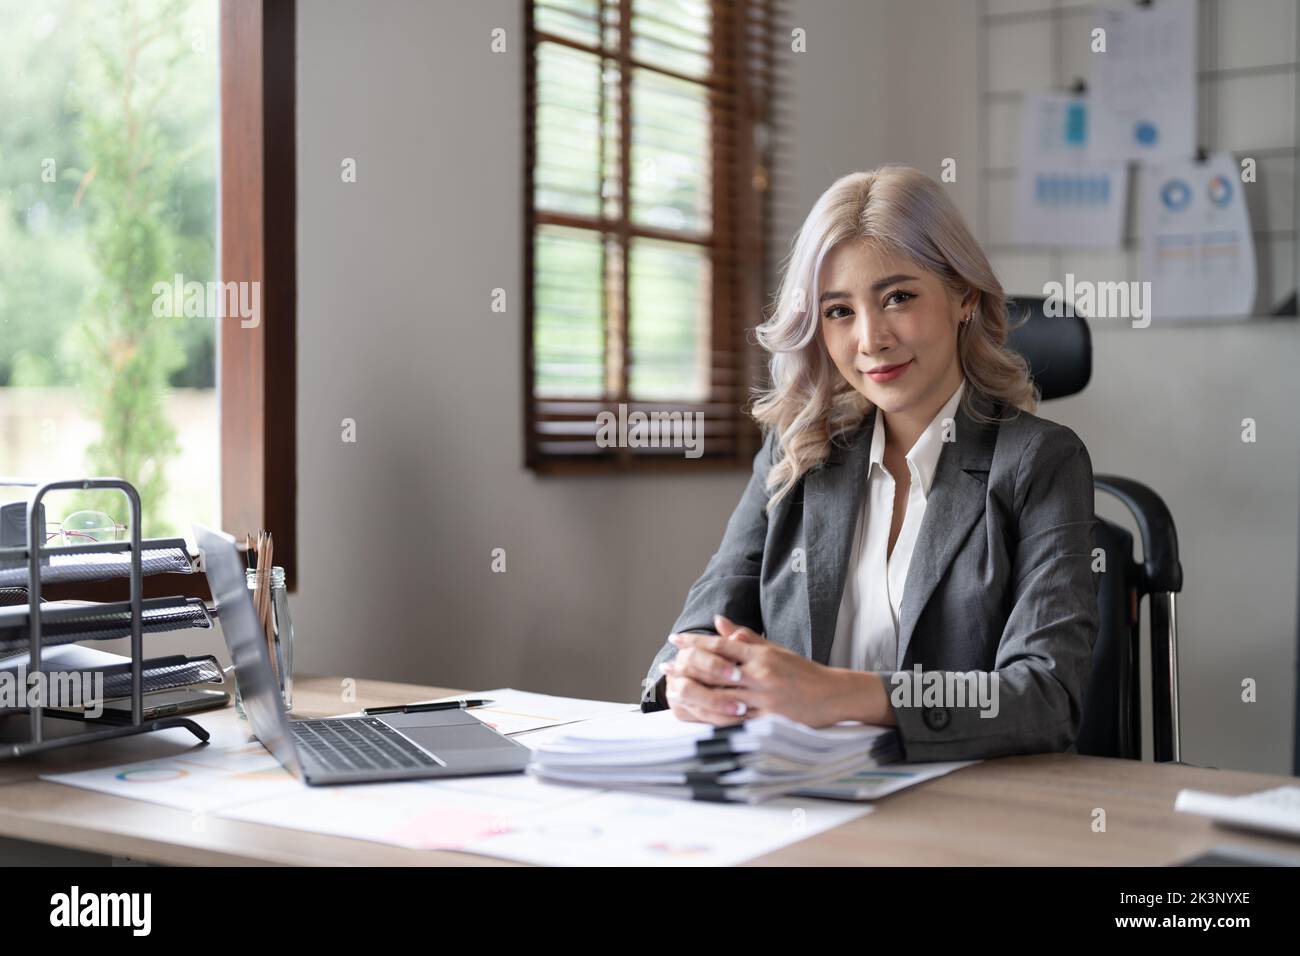 Pretty asian businesswoman smiles at the camera while sitting at her desk in front of the computer. Stock Photo